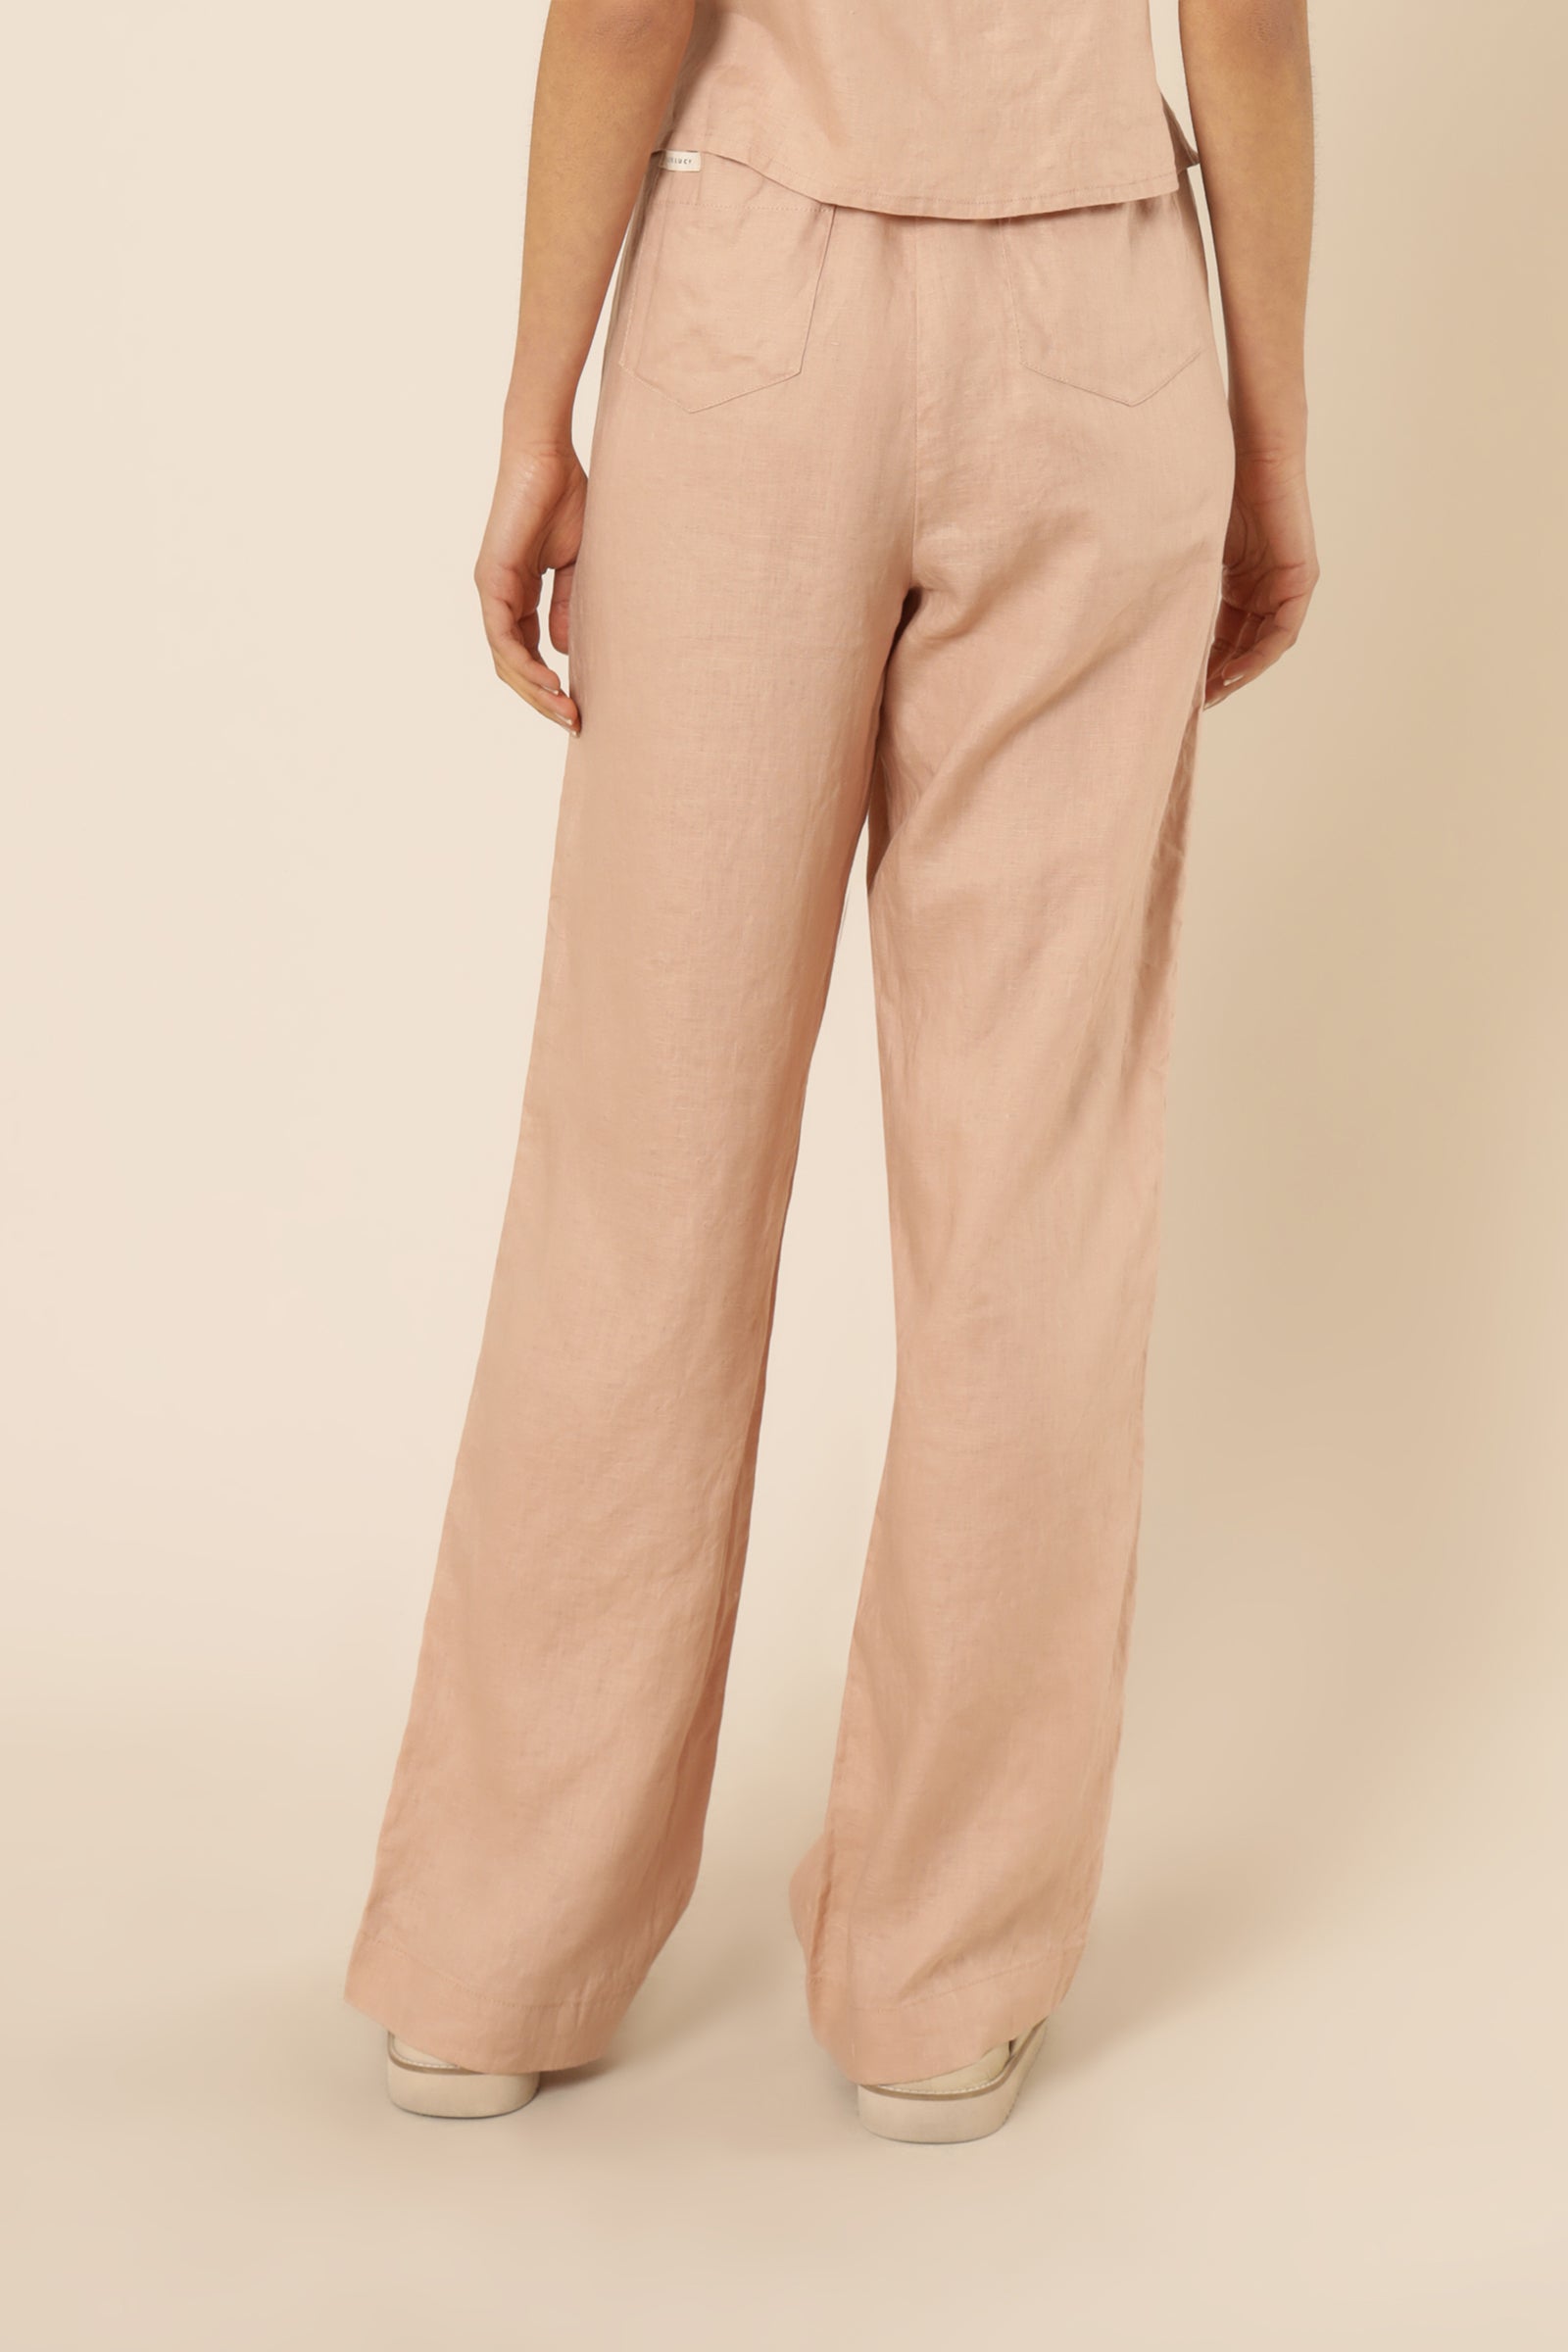 Nude Lucy nude linen lounge pant clay pants